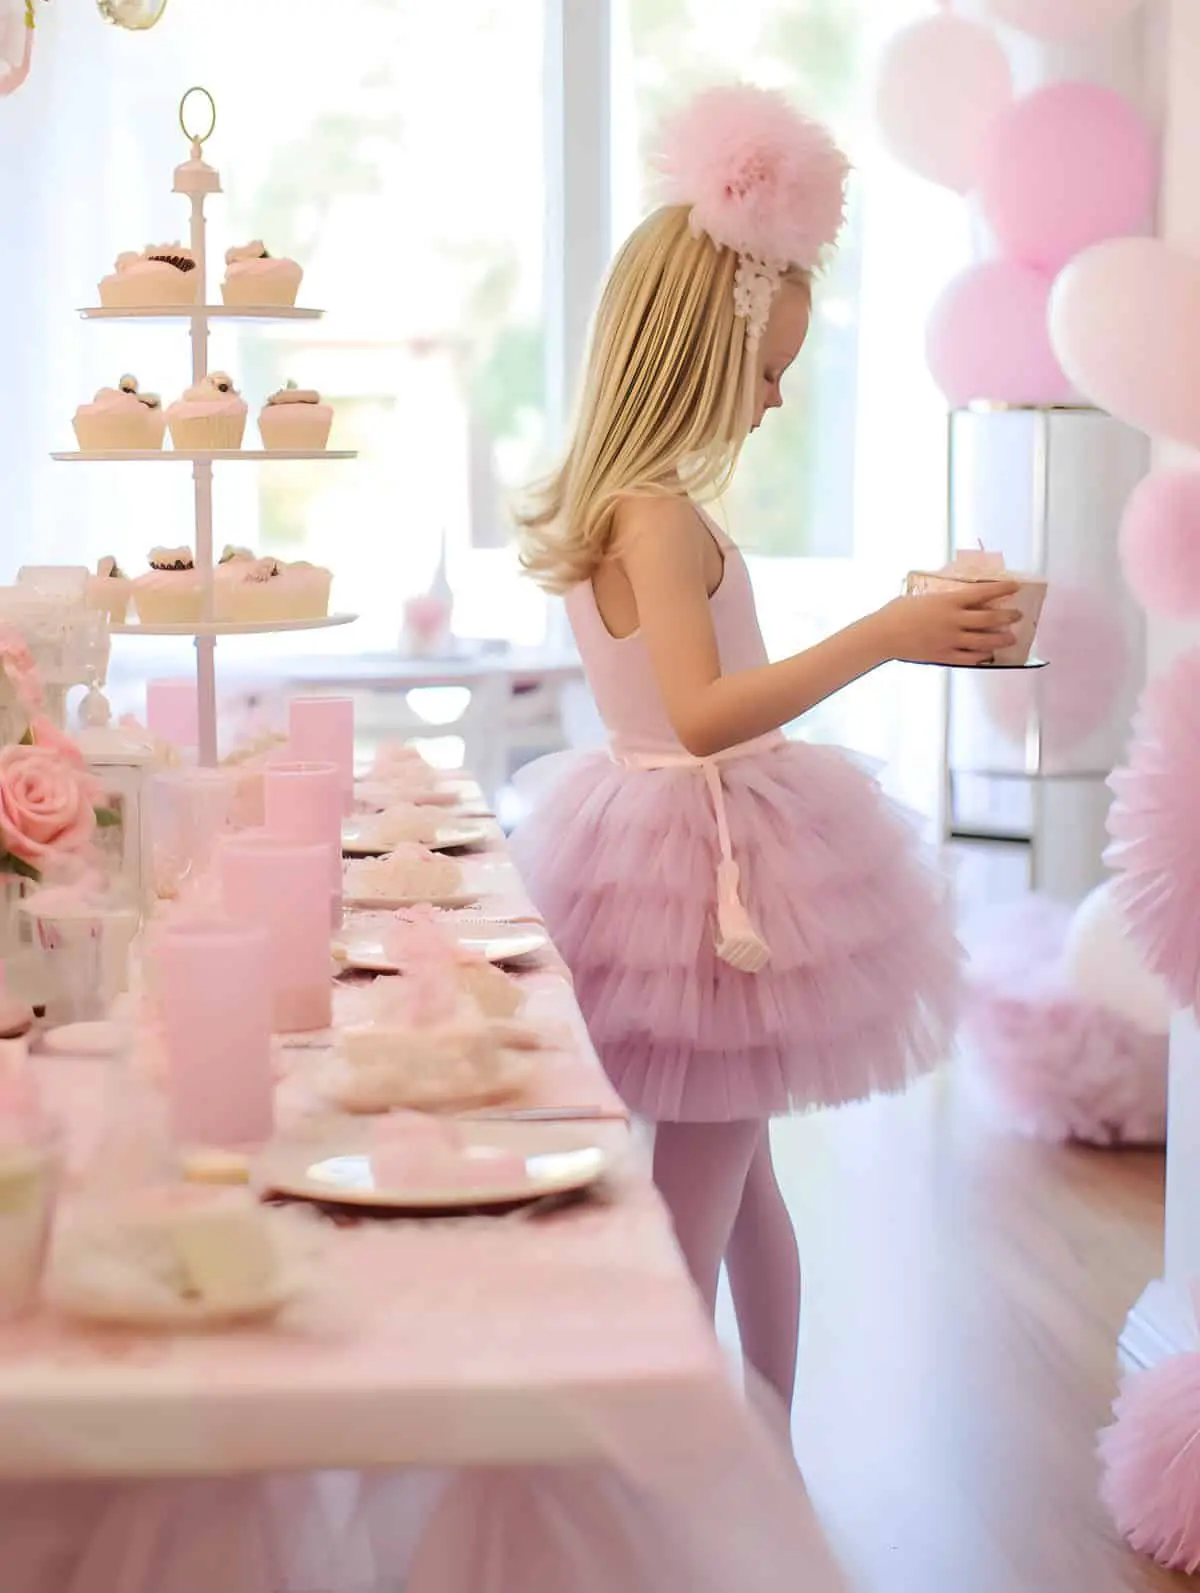 A little girl ballerina in a tutu at a ballet party a beautiful pink tablescape with cupcakes and decorations.